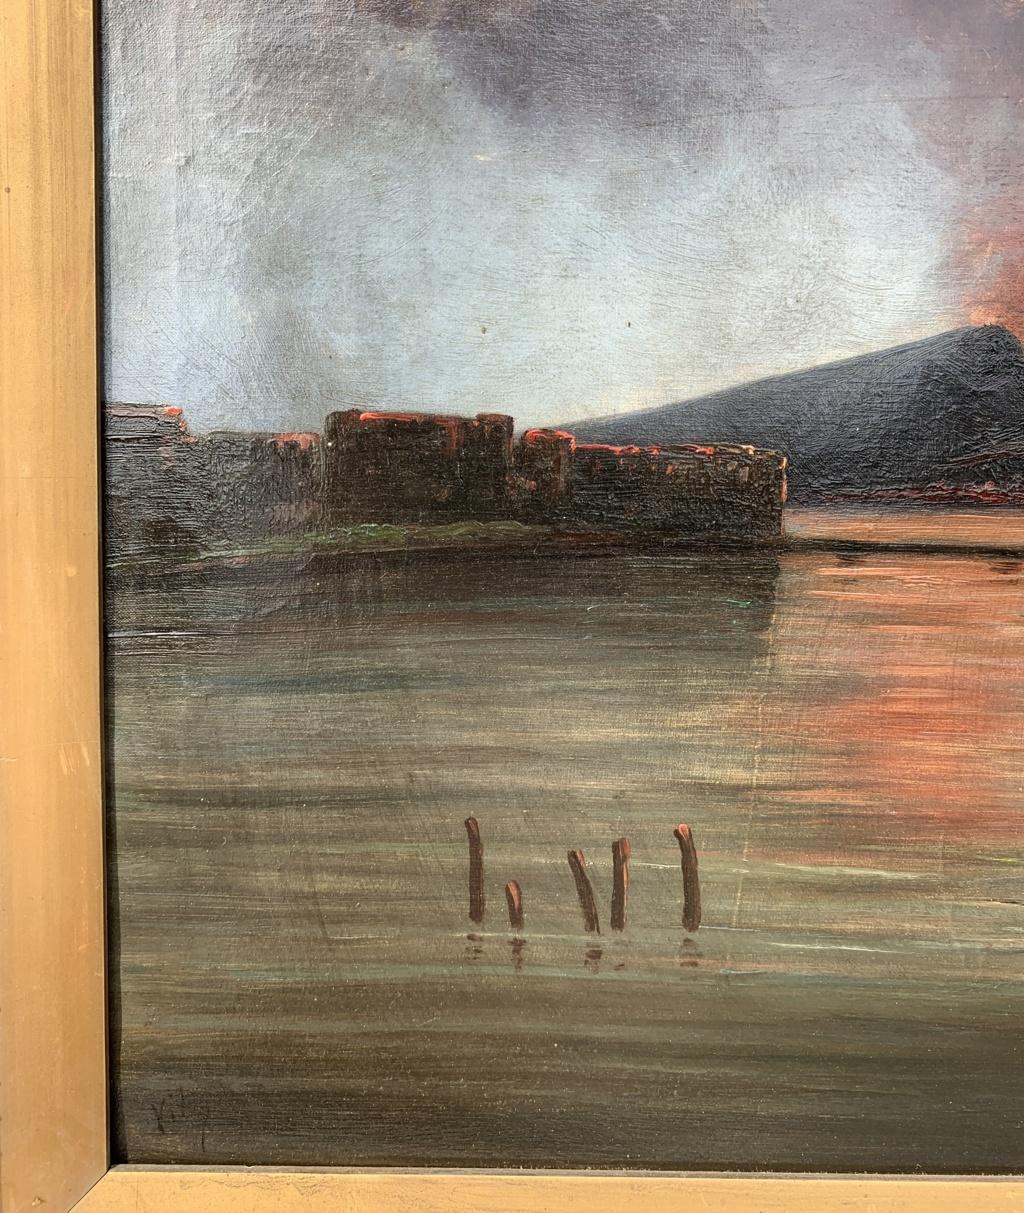 Vedutist Naples painter - 19th century painting - Vesuvius Gulf - Oil on canvas  - Naturalistic Painting by Unknown